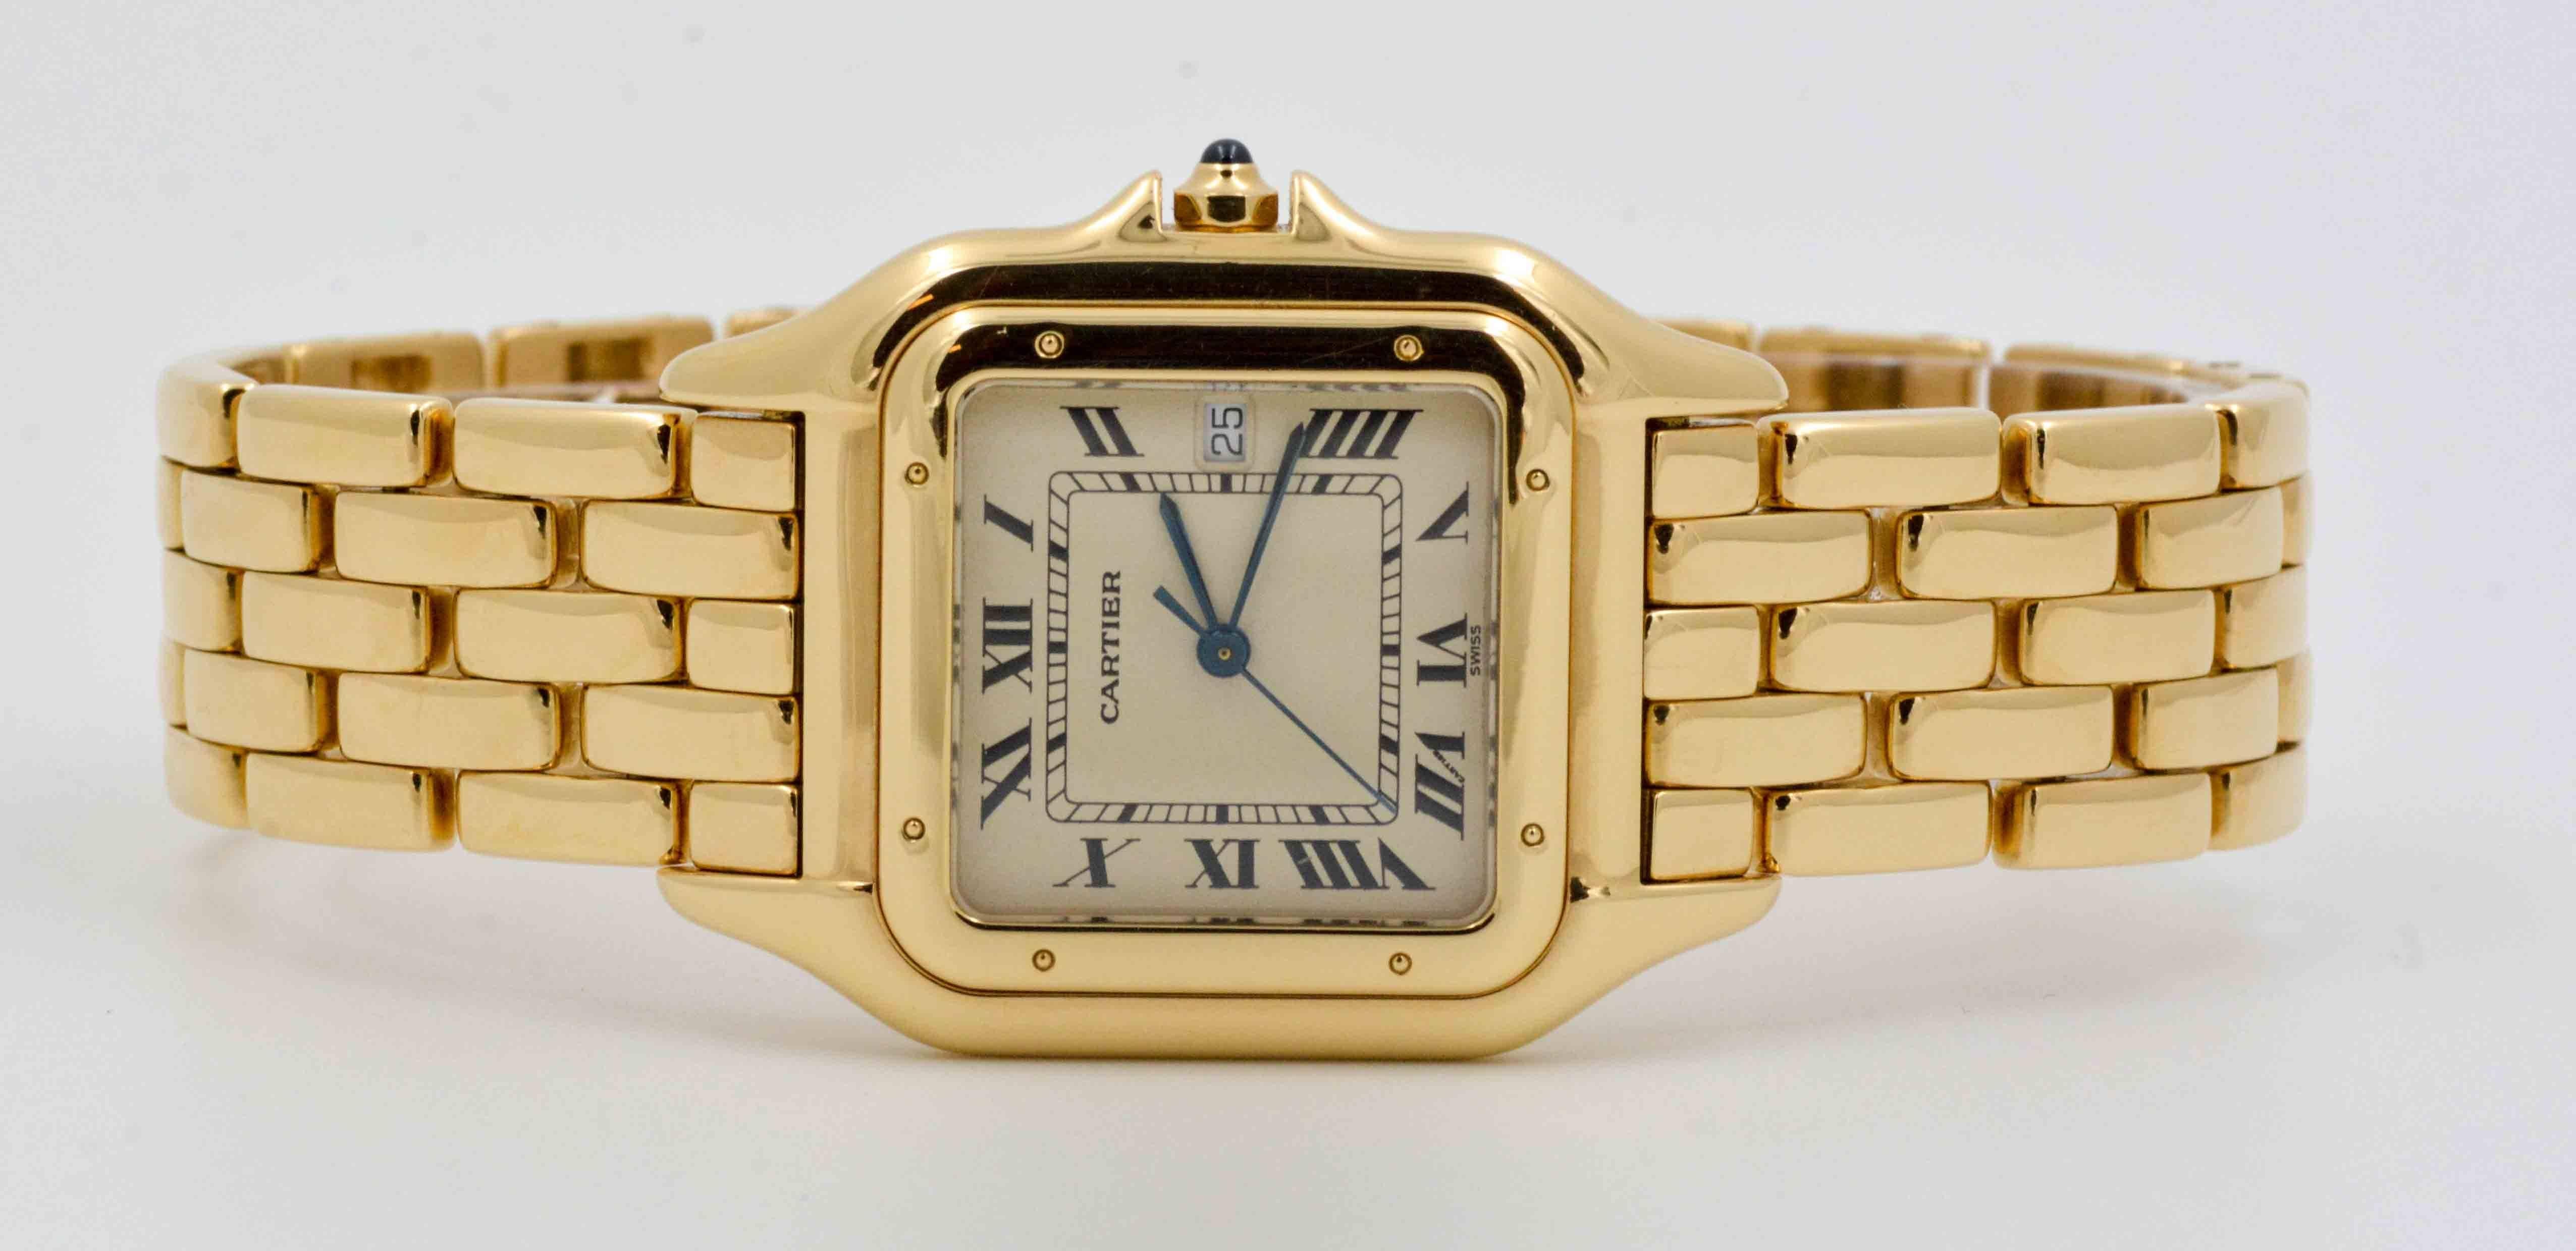 This certified pre-owned Cartier large Panthere watch has a 29 mm 18kt yellow gold case, white dial with Roman numerals, synthetic sapphire crystal, and a date window. An 18kt yellow gold band completes the stunning design. The timepiece has been